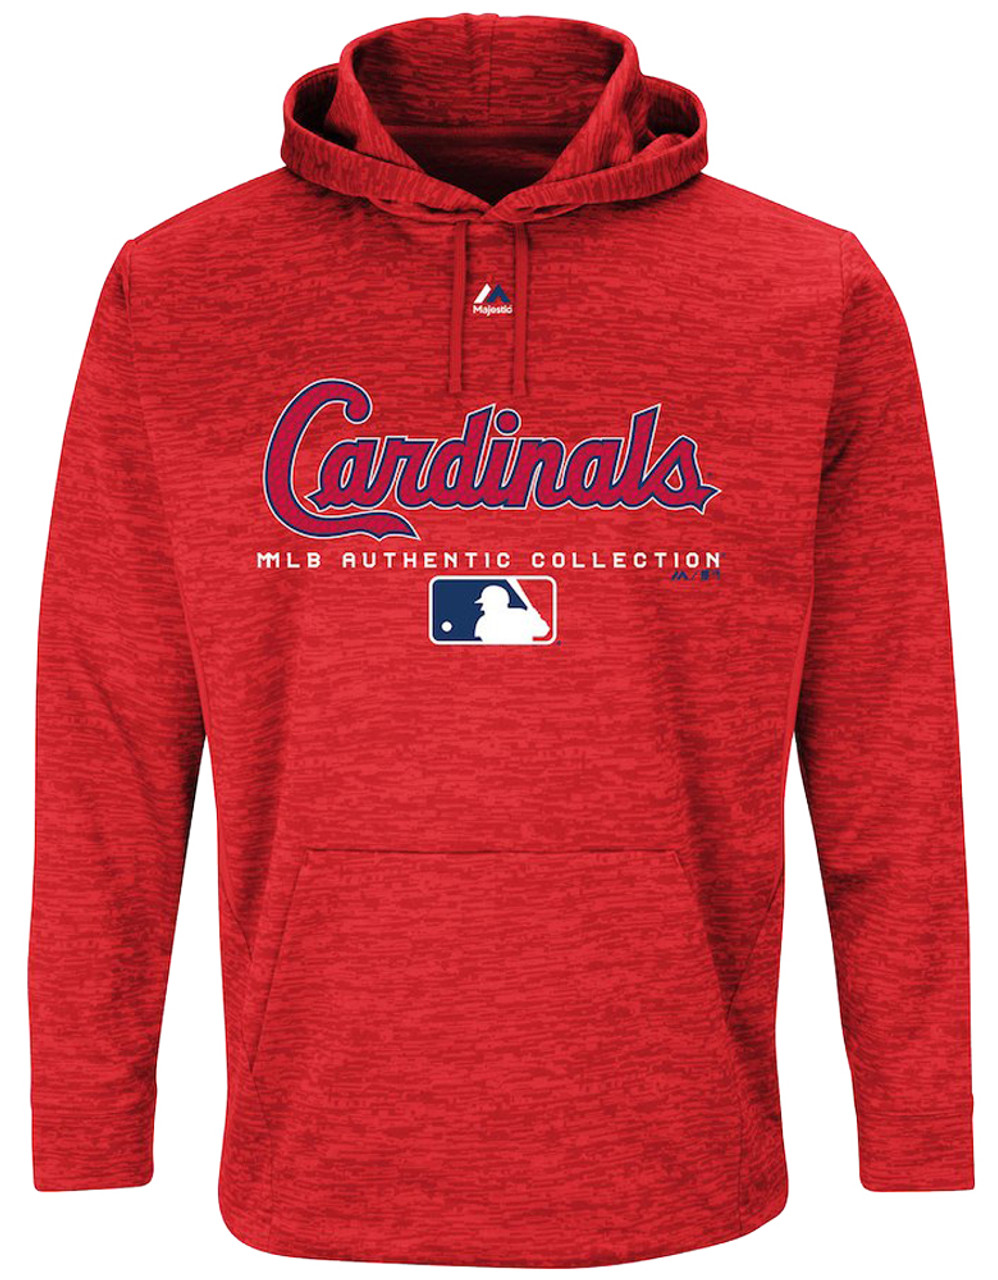 MLB Authentic Collection Drive Ultra-Streak Hoodie 3 Teams XLT, 2X